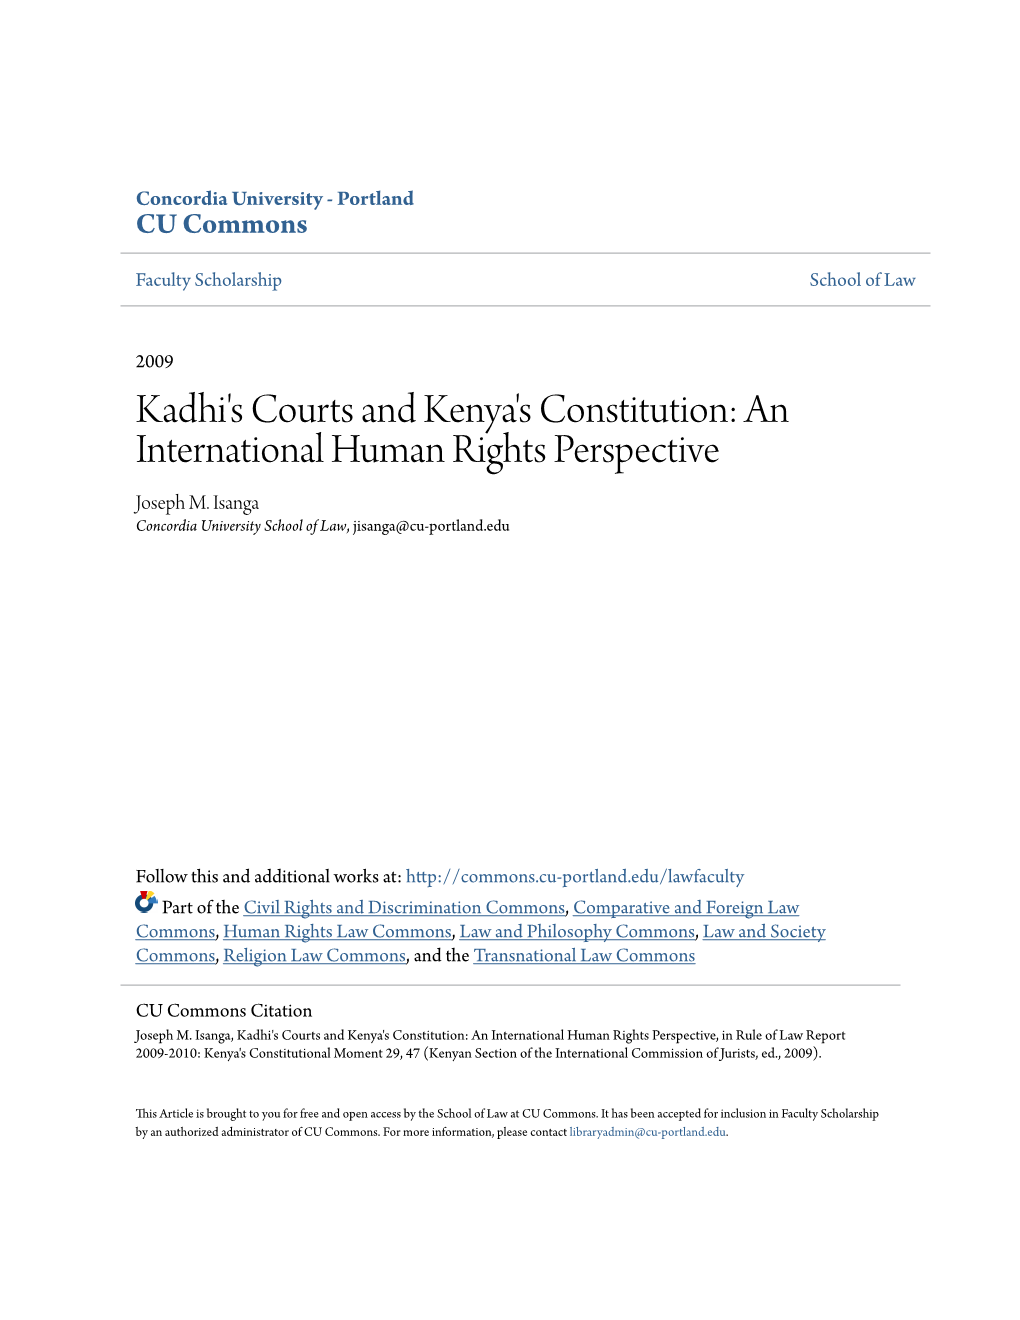 Kadhi's Courts and Kenya's Constitution: an International Human Rights Perspective Joseph M